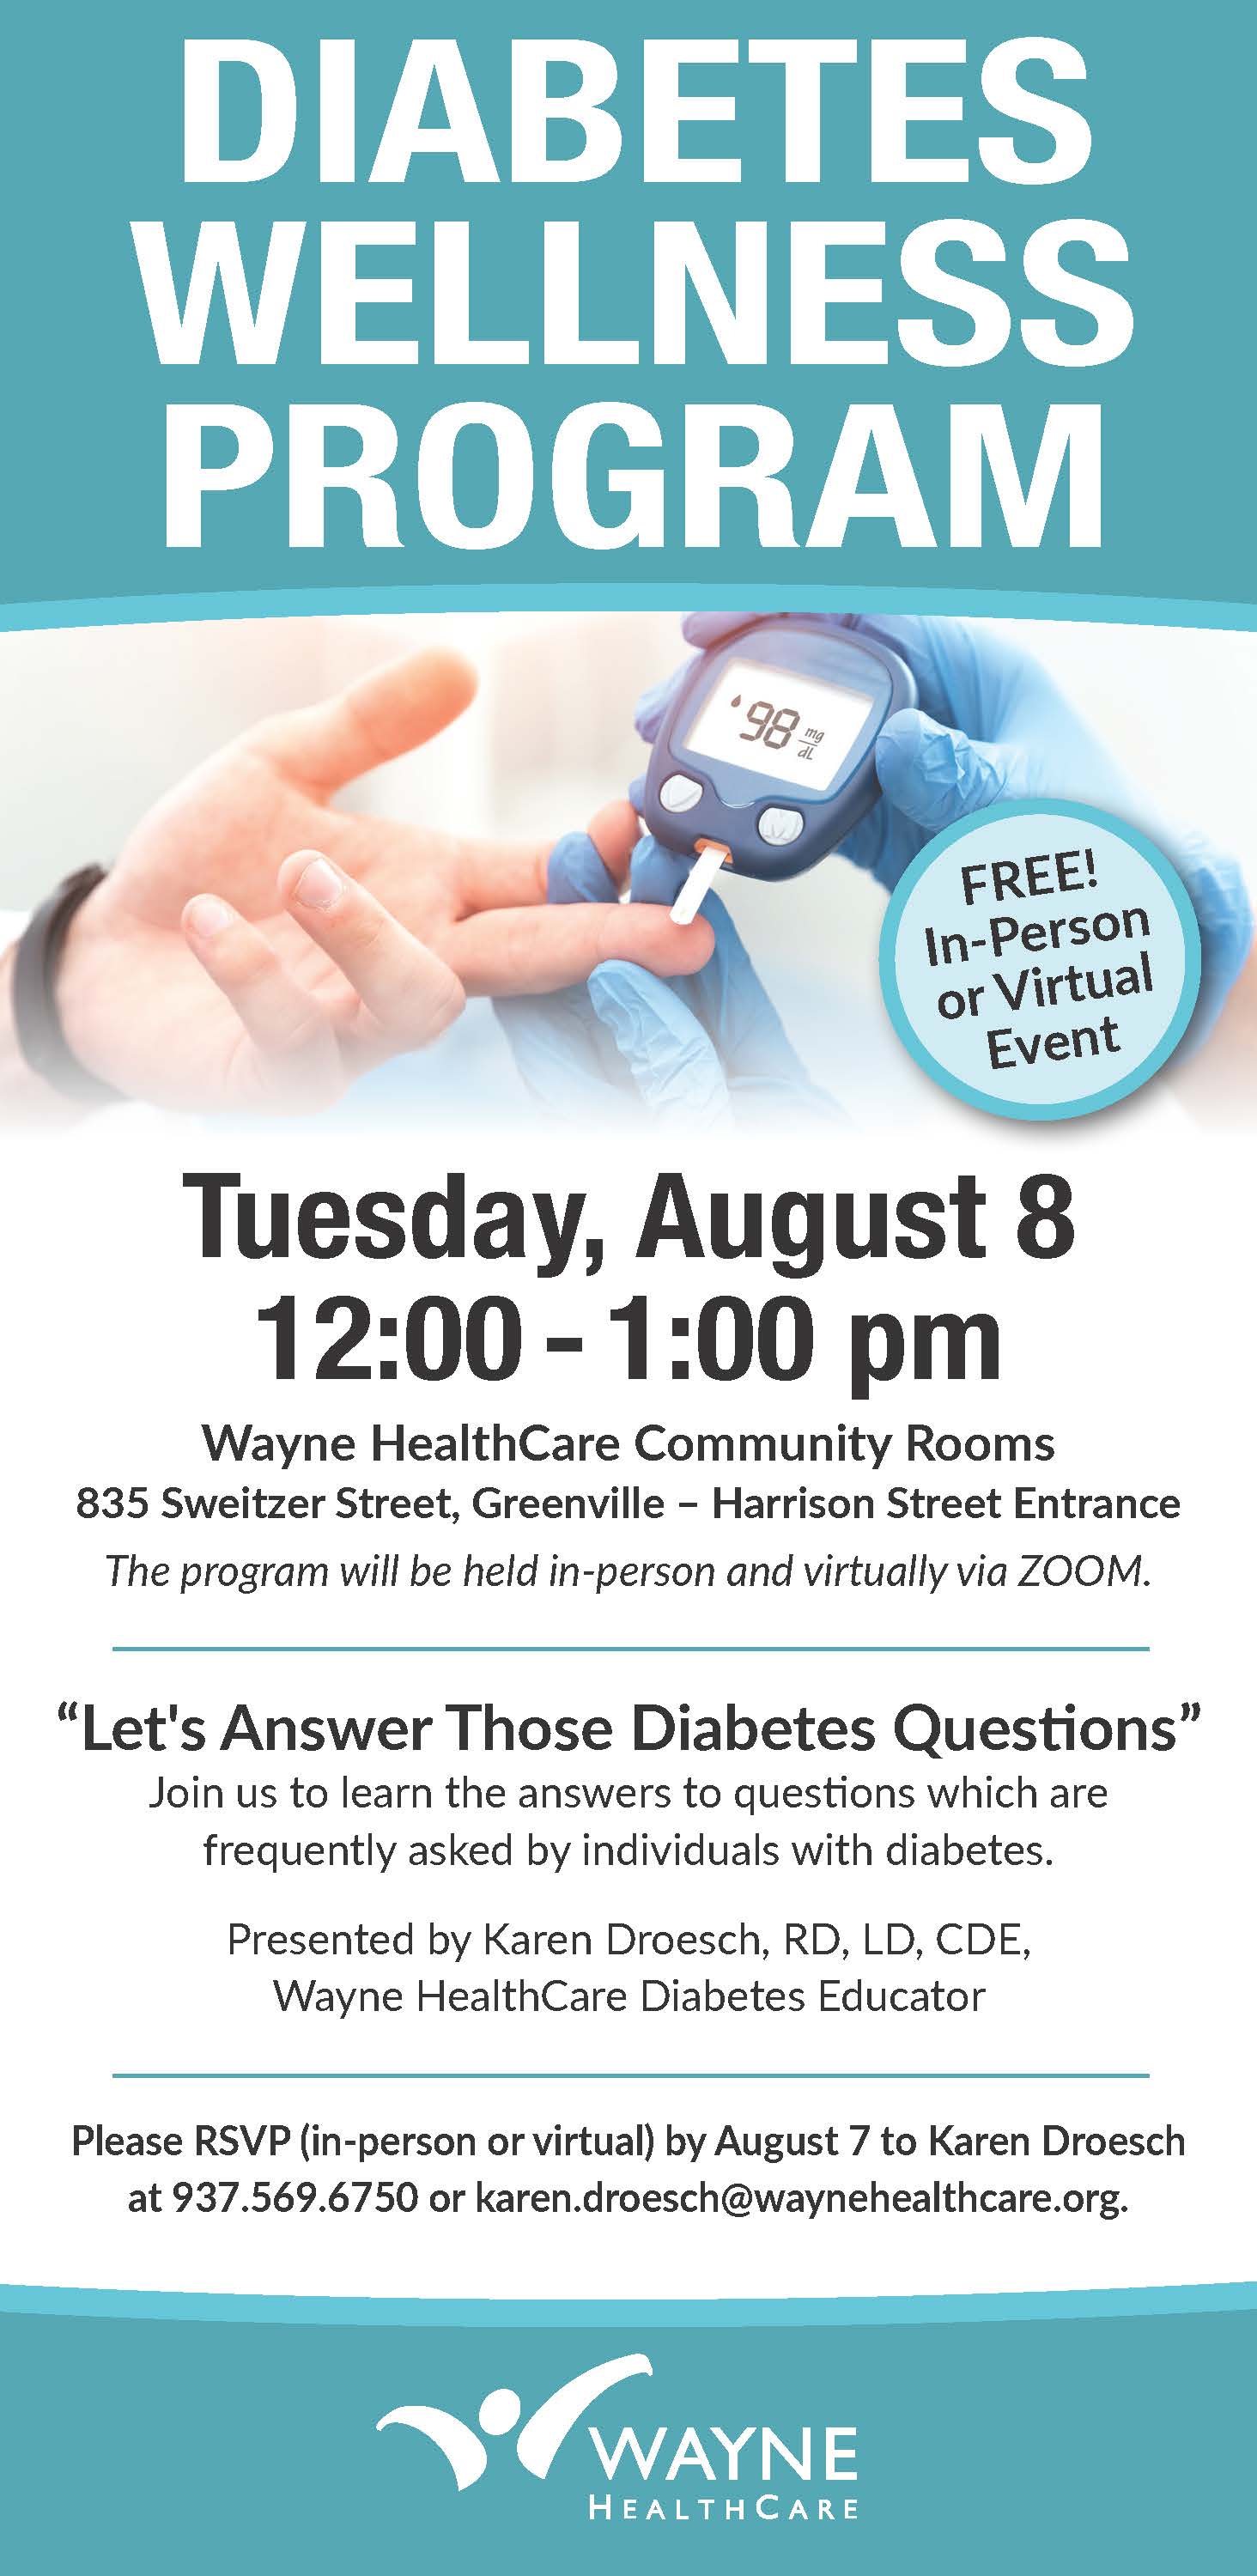 Checking a finger with glucose meter and diabetes program information